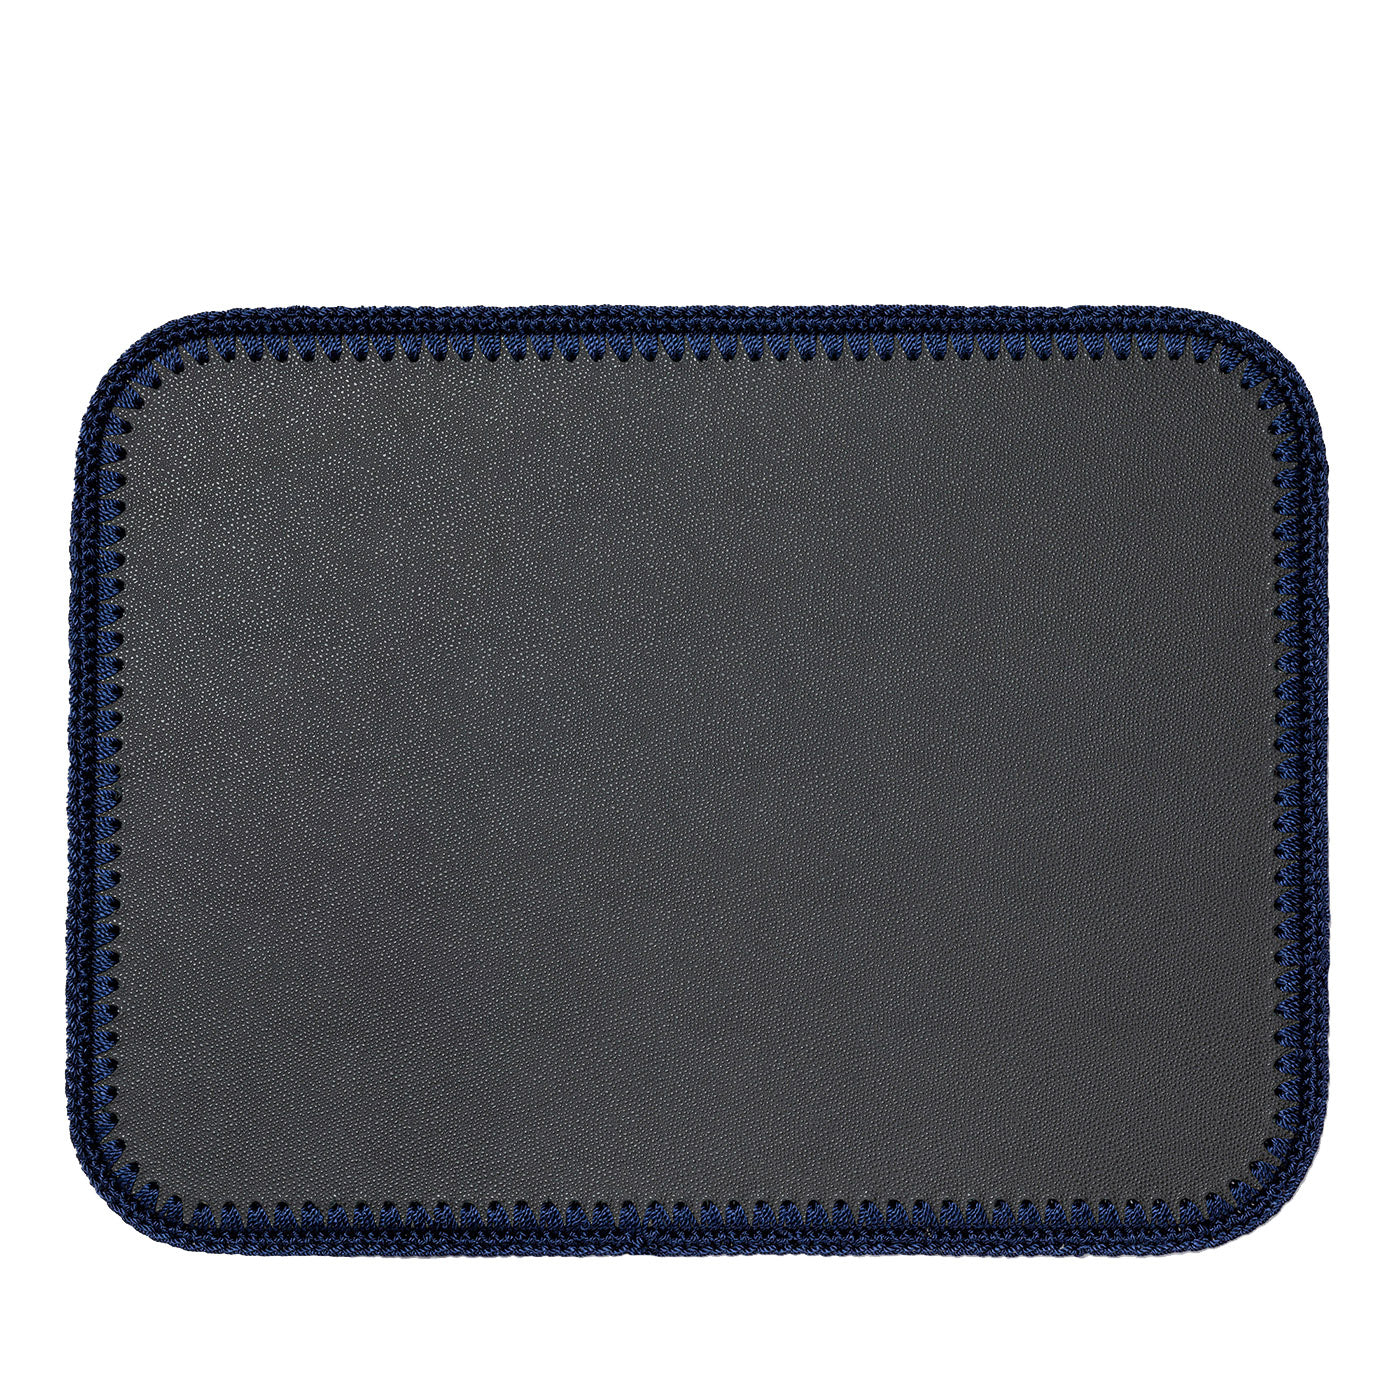 Rochelle Leather & Crochet Placemats Rectangular - Gray & Blue #2 - Main view